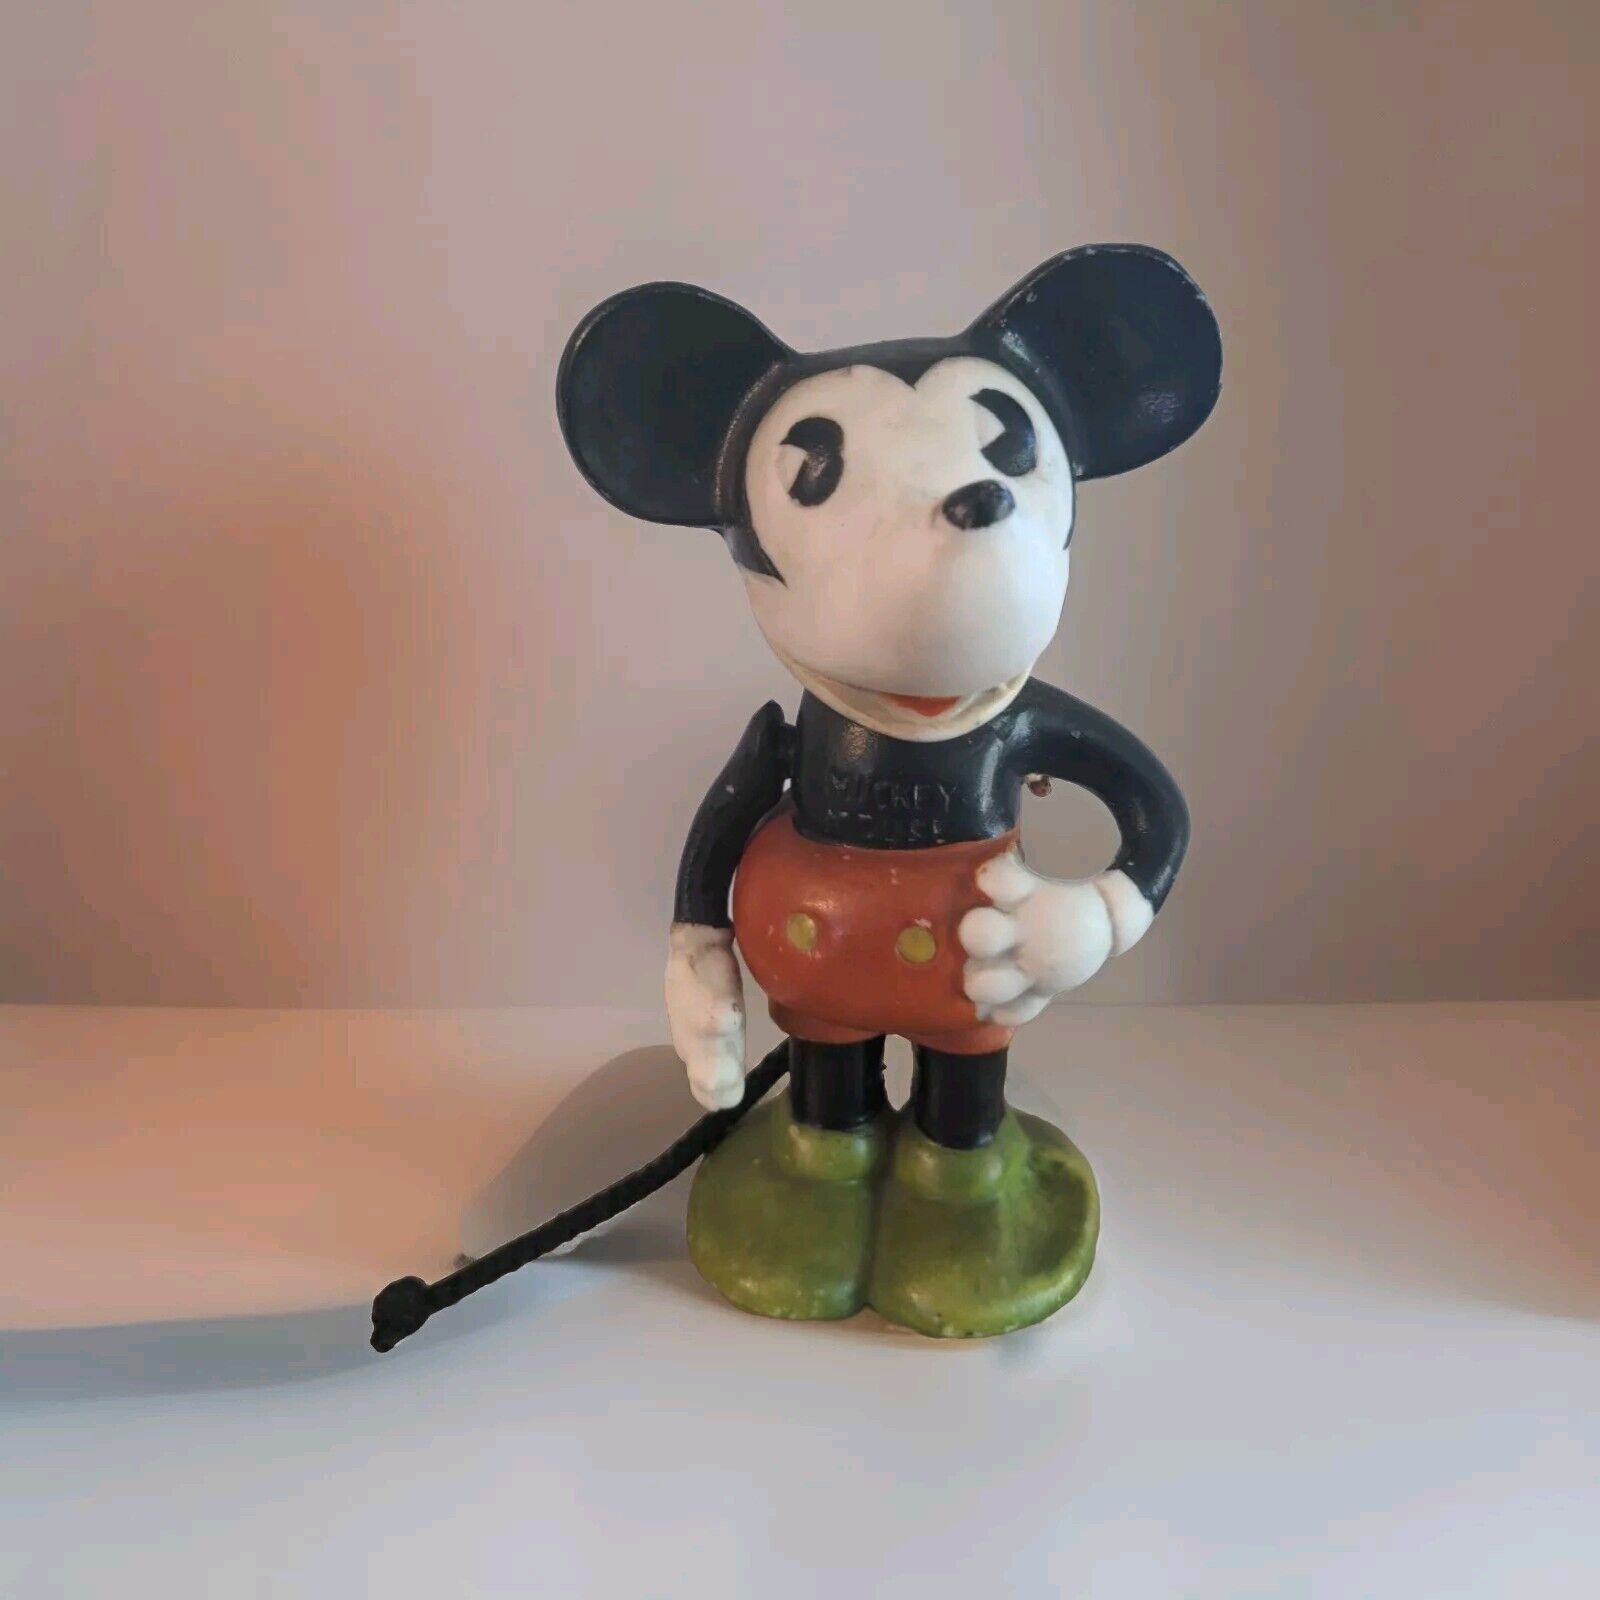 1930'S MICKEY MOUSE MOVABLE ARM TOOTHBRUSH HOLDER W/LABEL JAPAN BISQUE FIGURINE